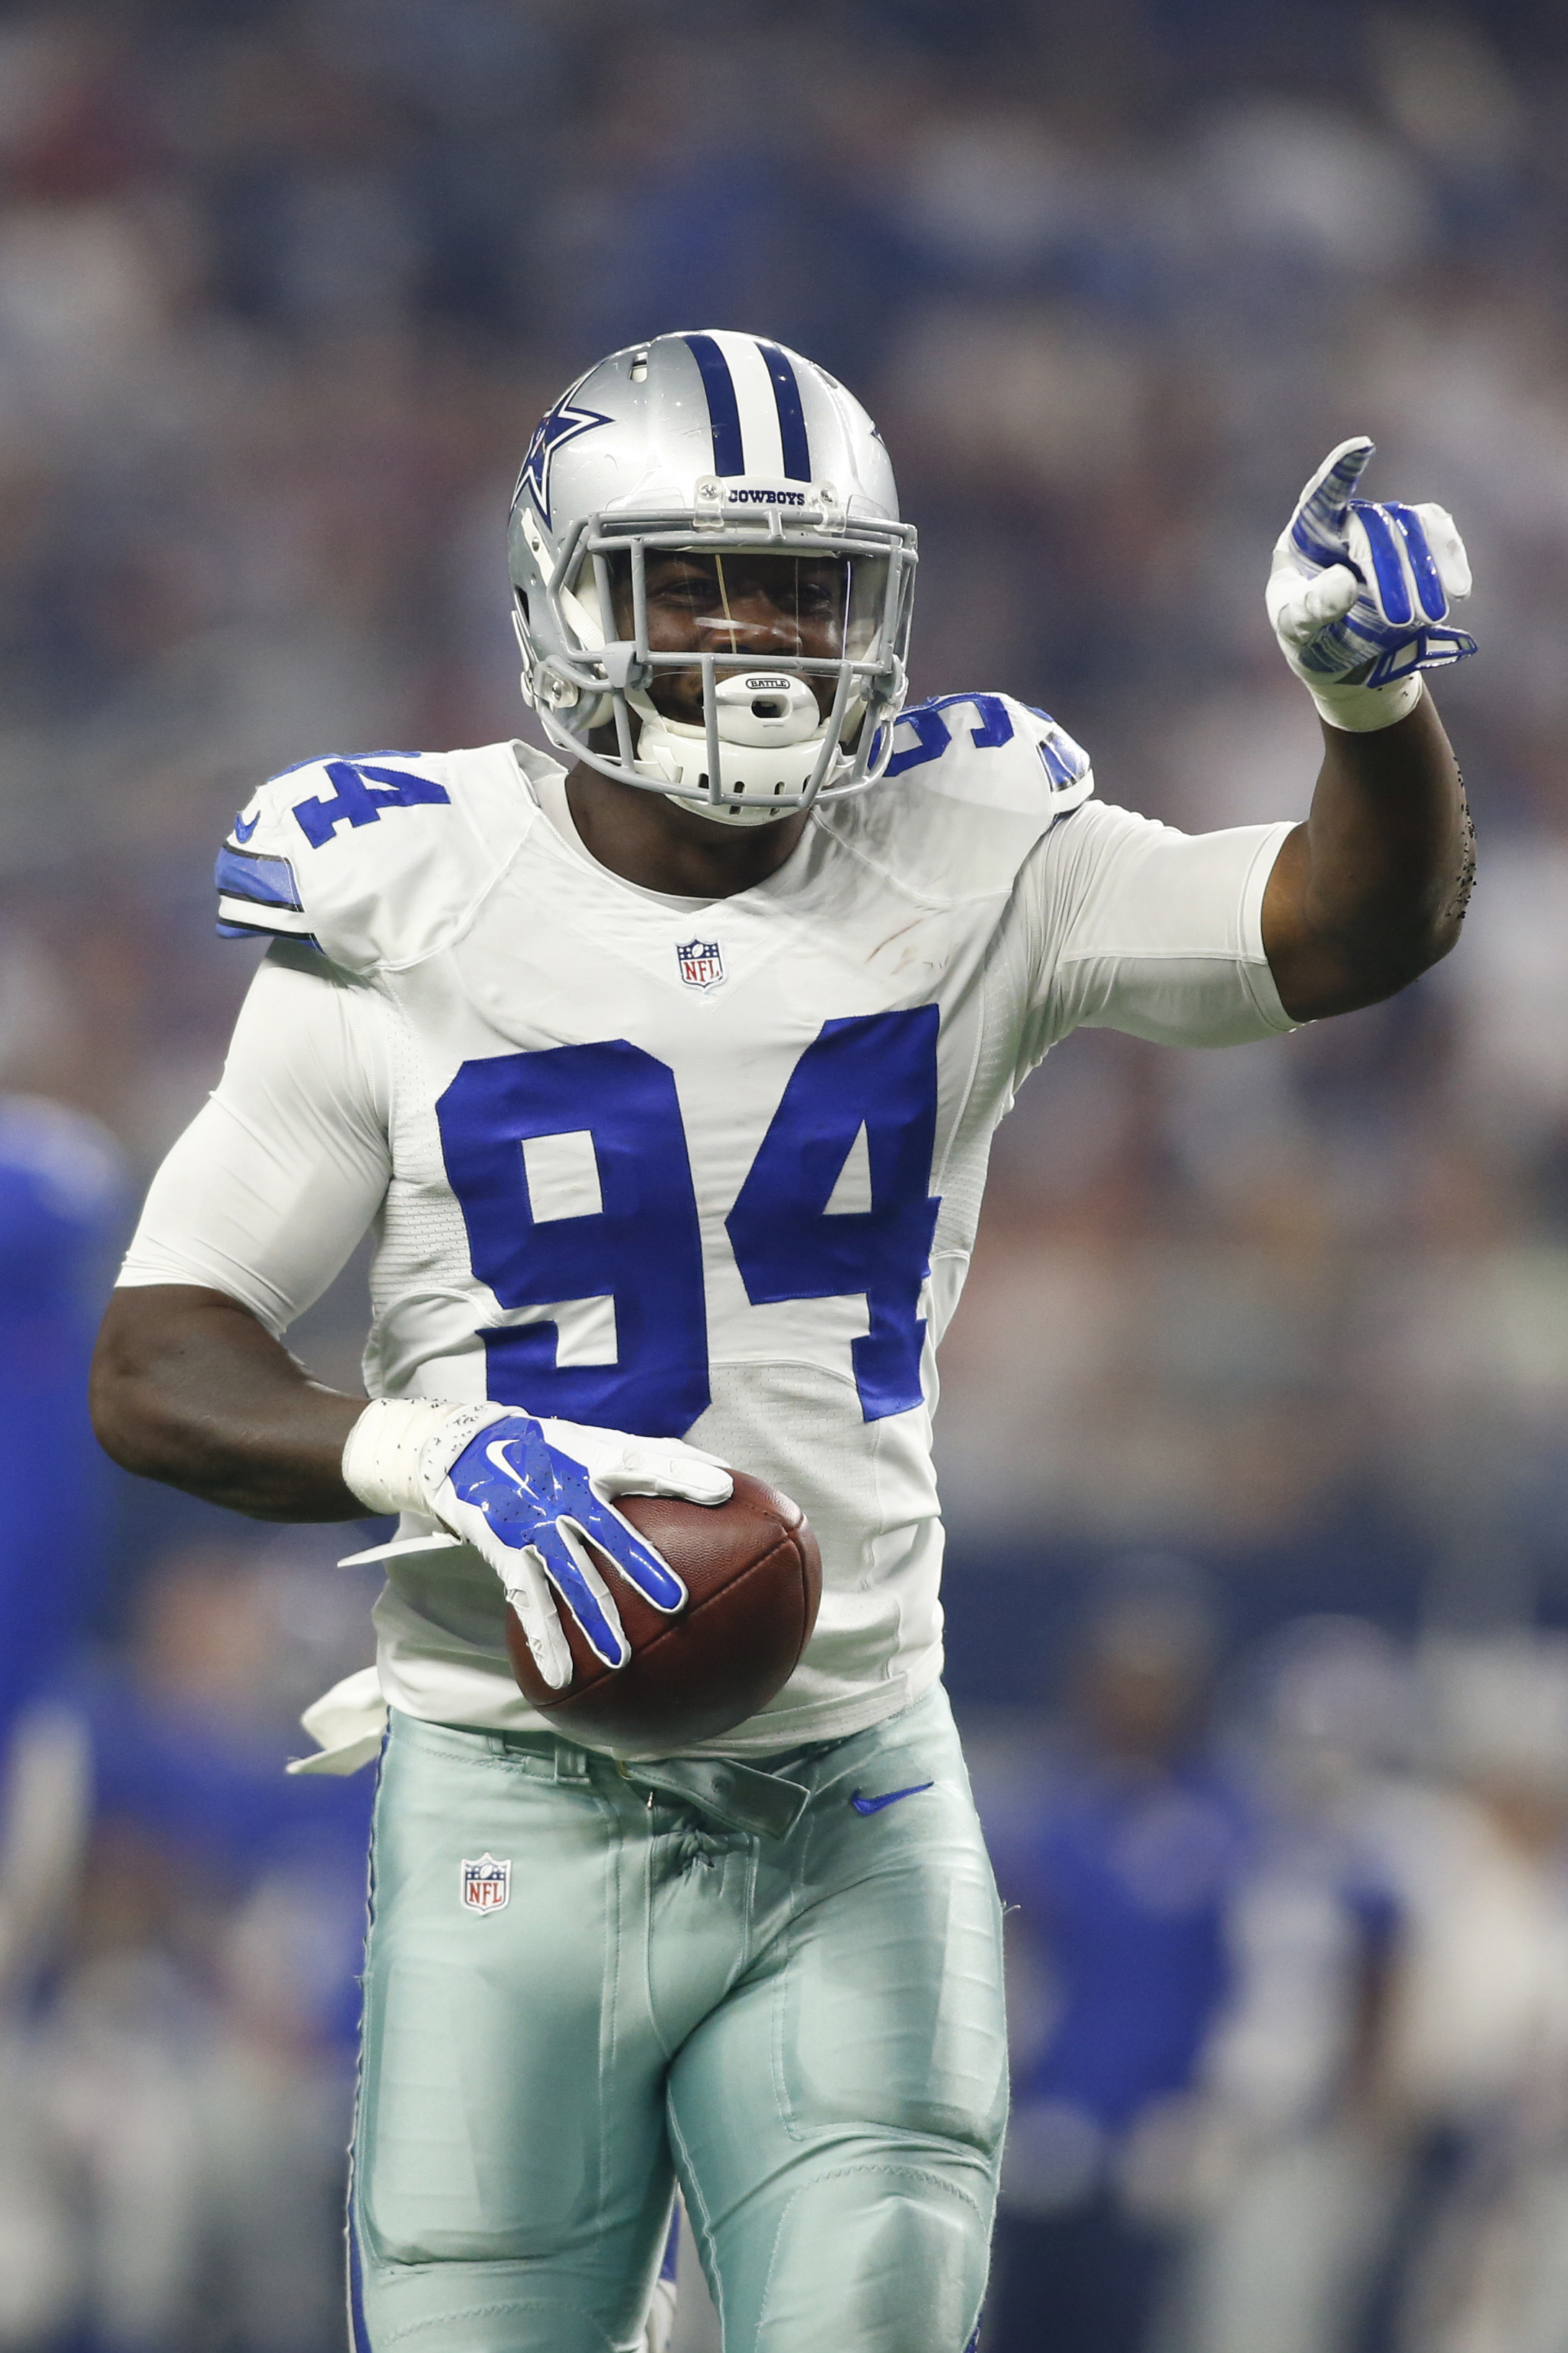 Randy Gregory To Start In 2021?